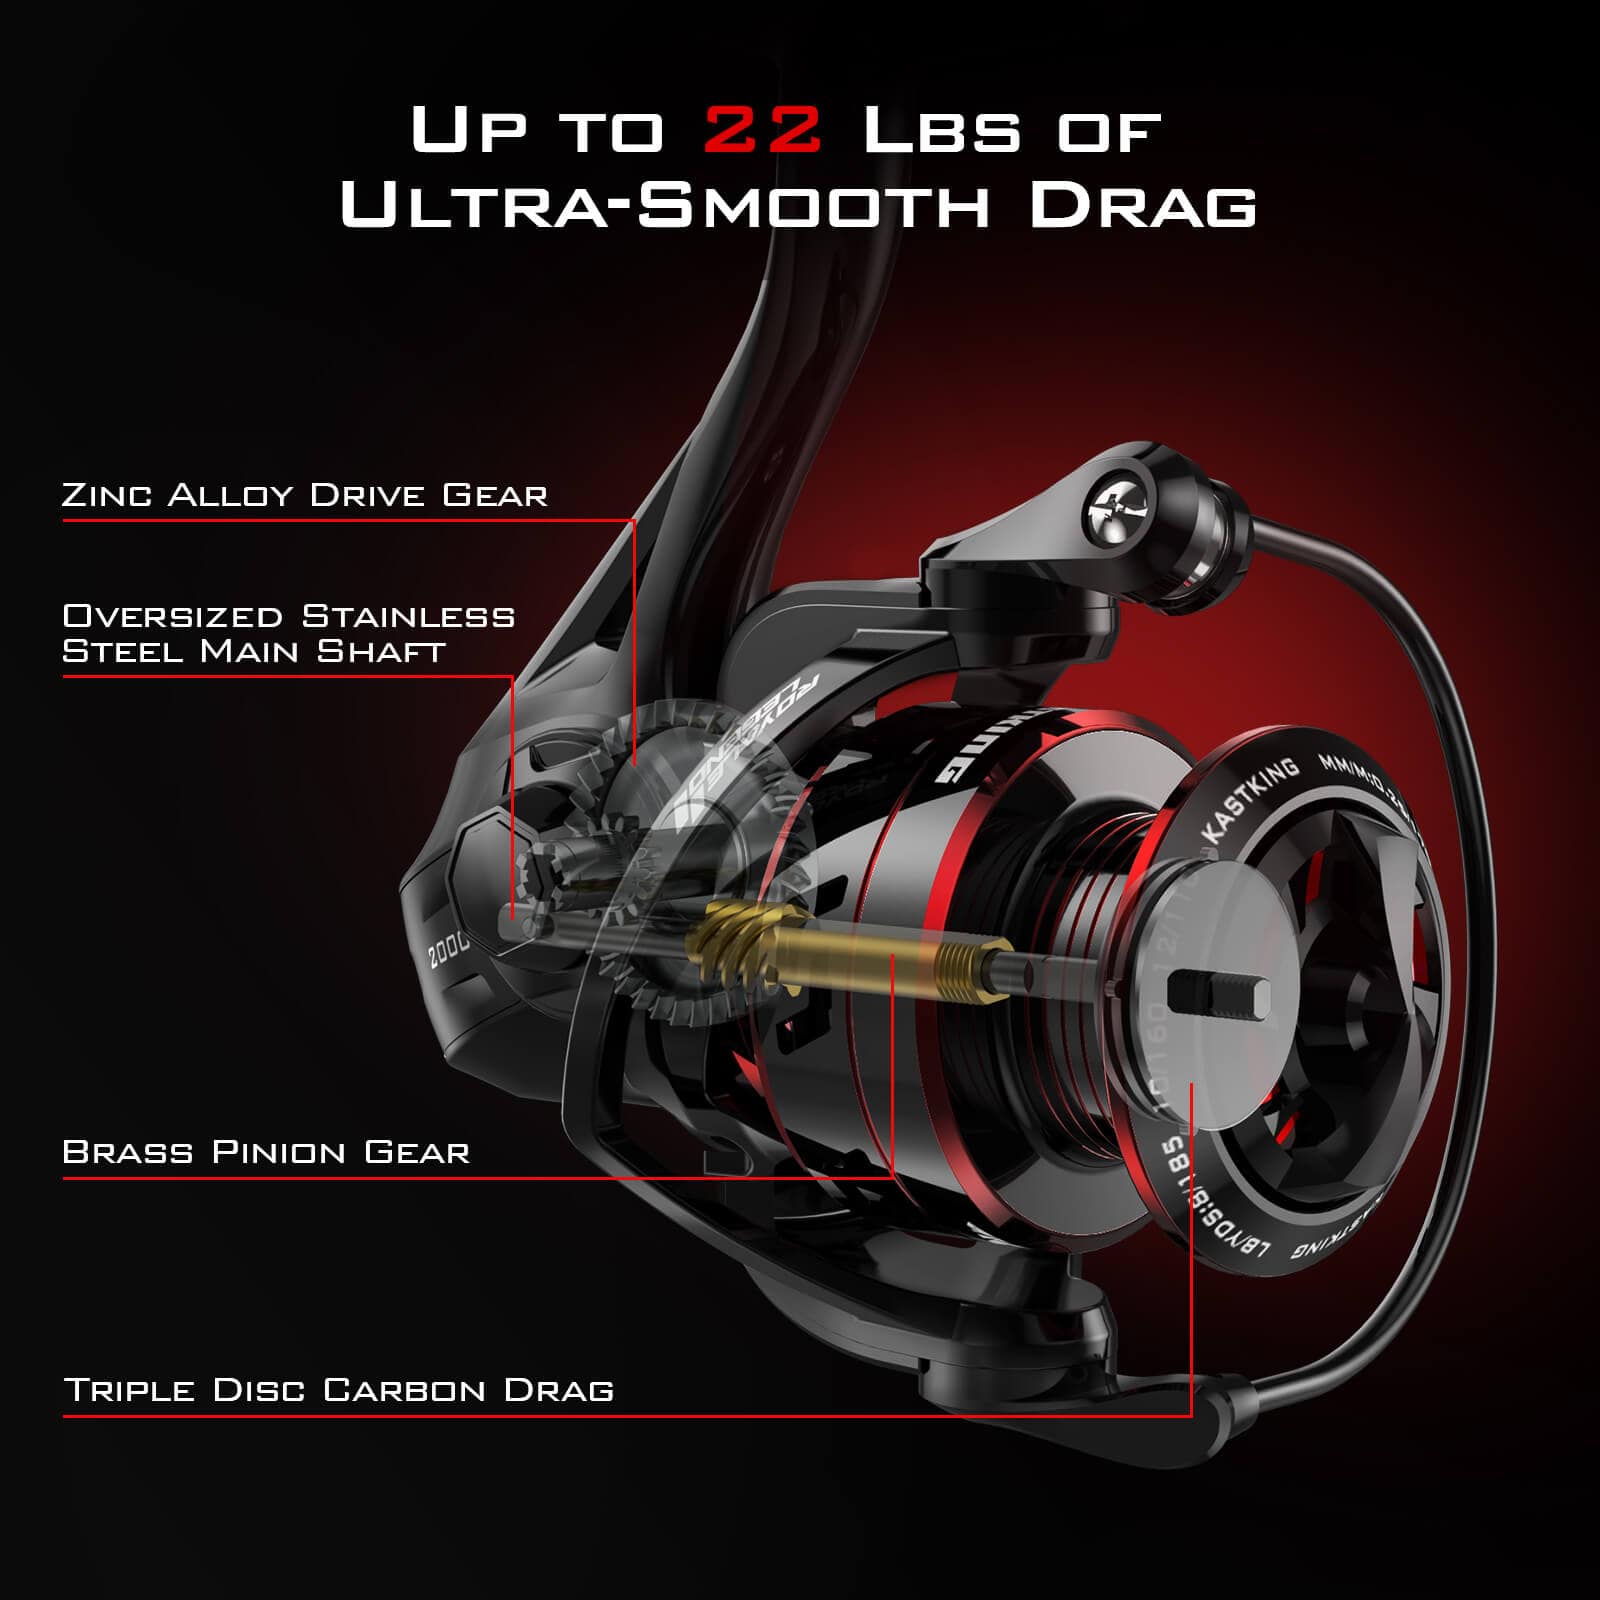 KastKing Royale Legend Glory Fishing Reel - 6.2:1 Gear Ratio Spinning Reel,  Up to 22 Lbs of Carbon Drag, 7+1 Stainless Steel Ball Bearings, Graphite